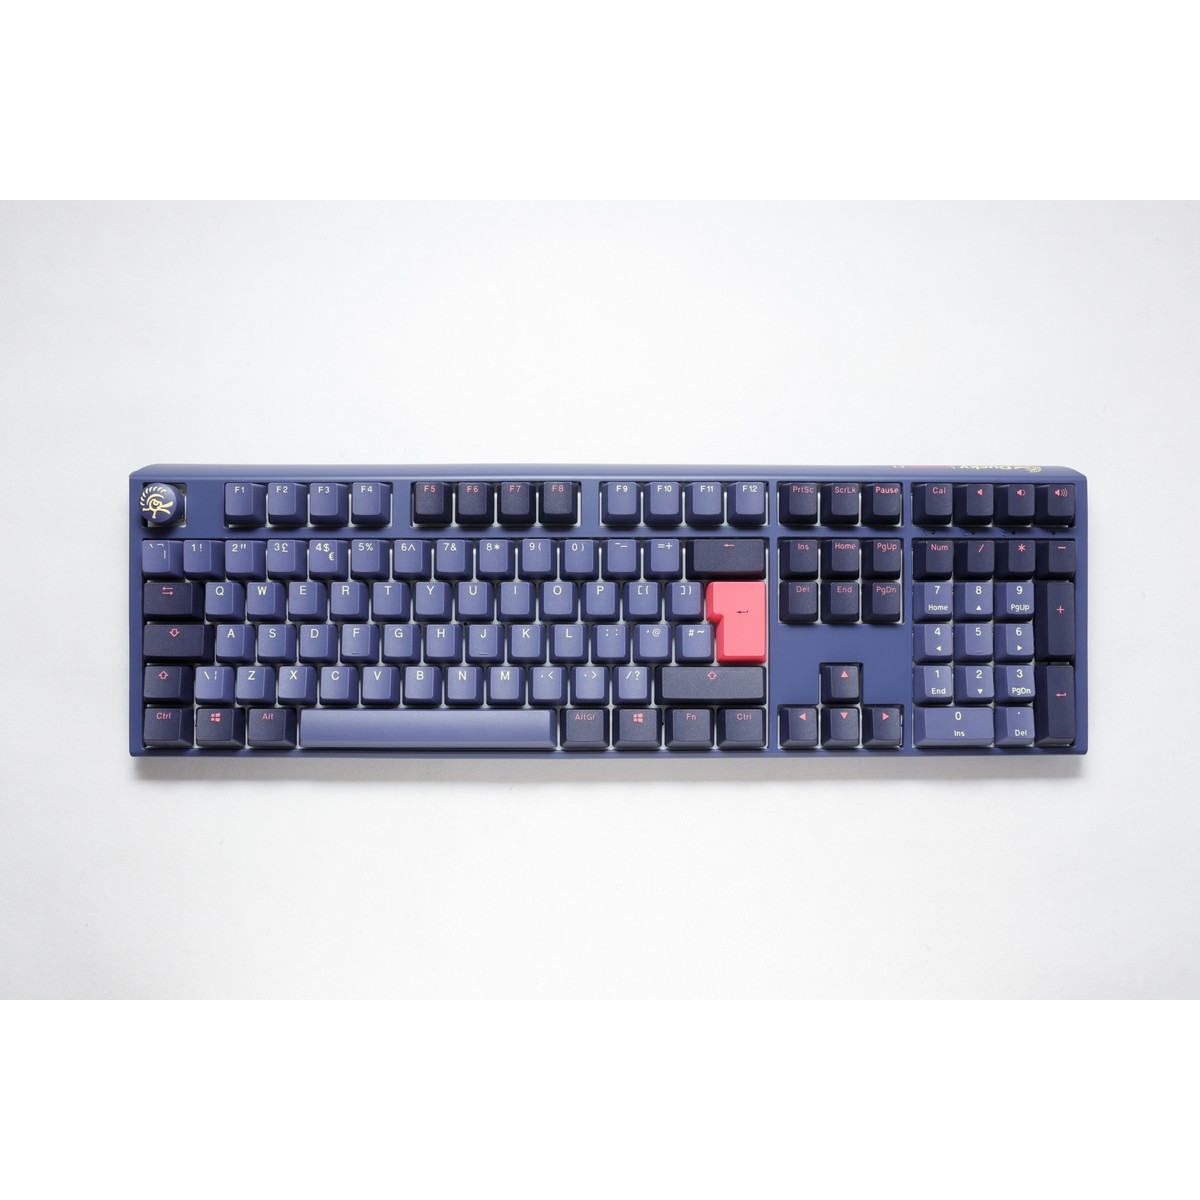 Ducky - Ducky One 3 Cosmic USB RGB Mechanical Gaming Keyboard Cherry MX Silent Red Switch - UK Layout